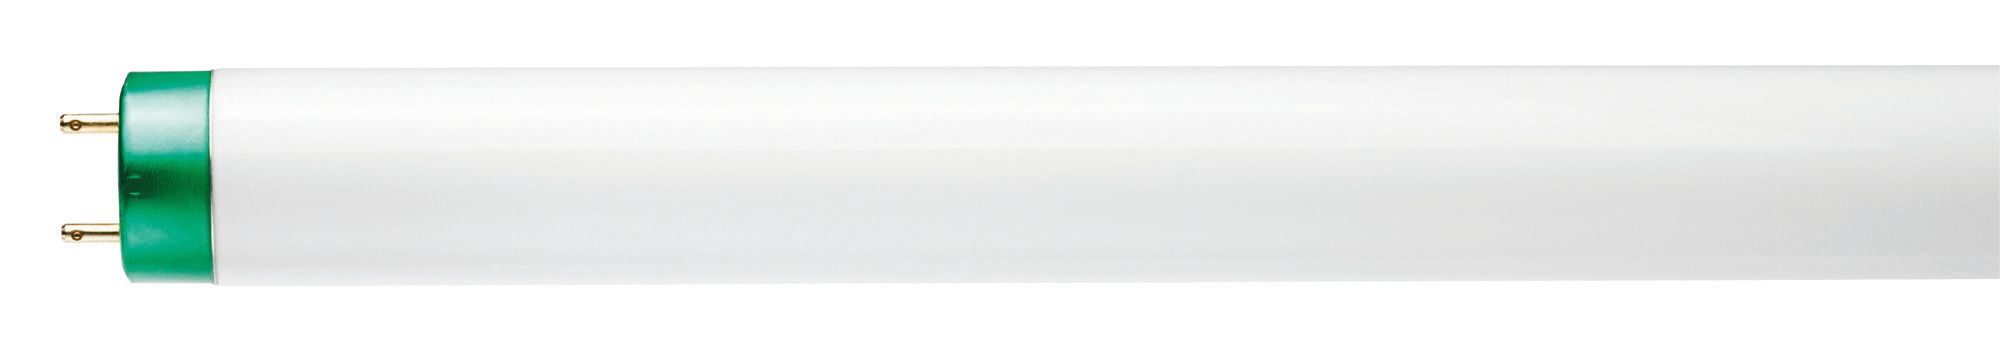 280784 Fluorescent Lamp Philips Lighting;Signify Lamps